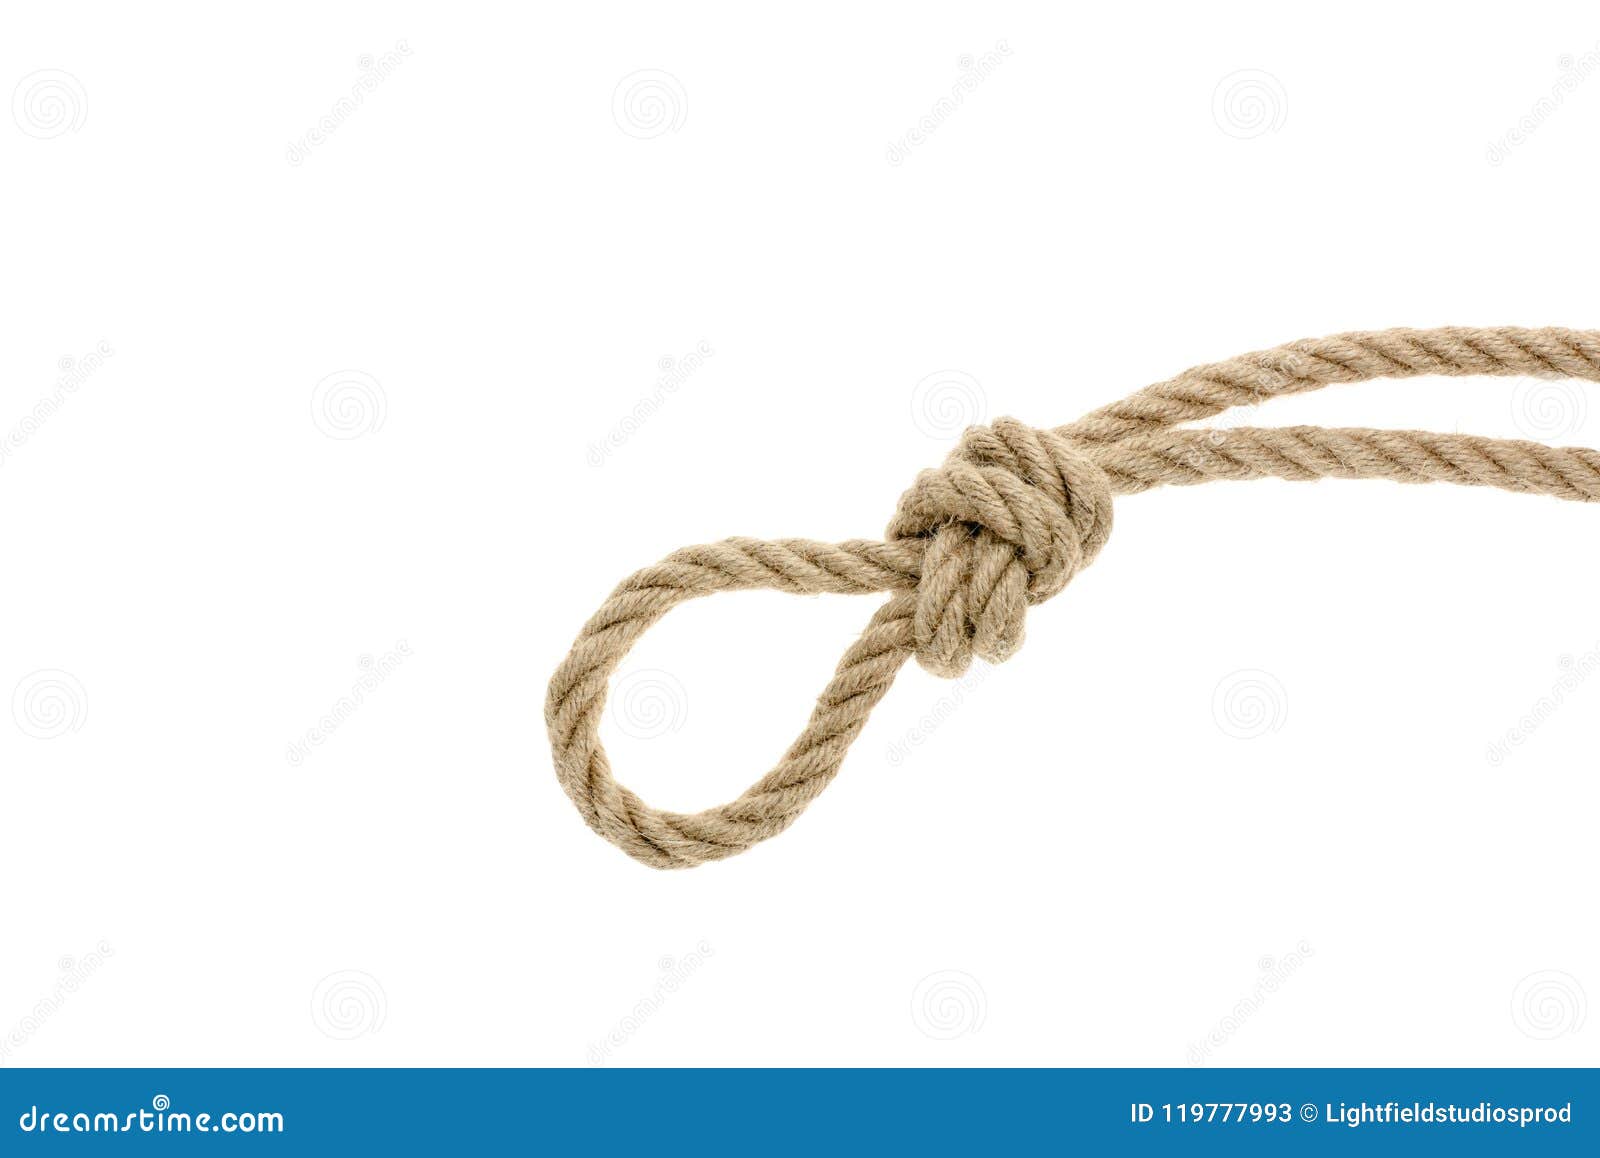 Close-up View of Rough Strong Rope with Knot Stock Image - Image